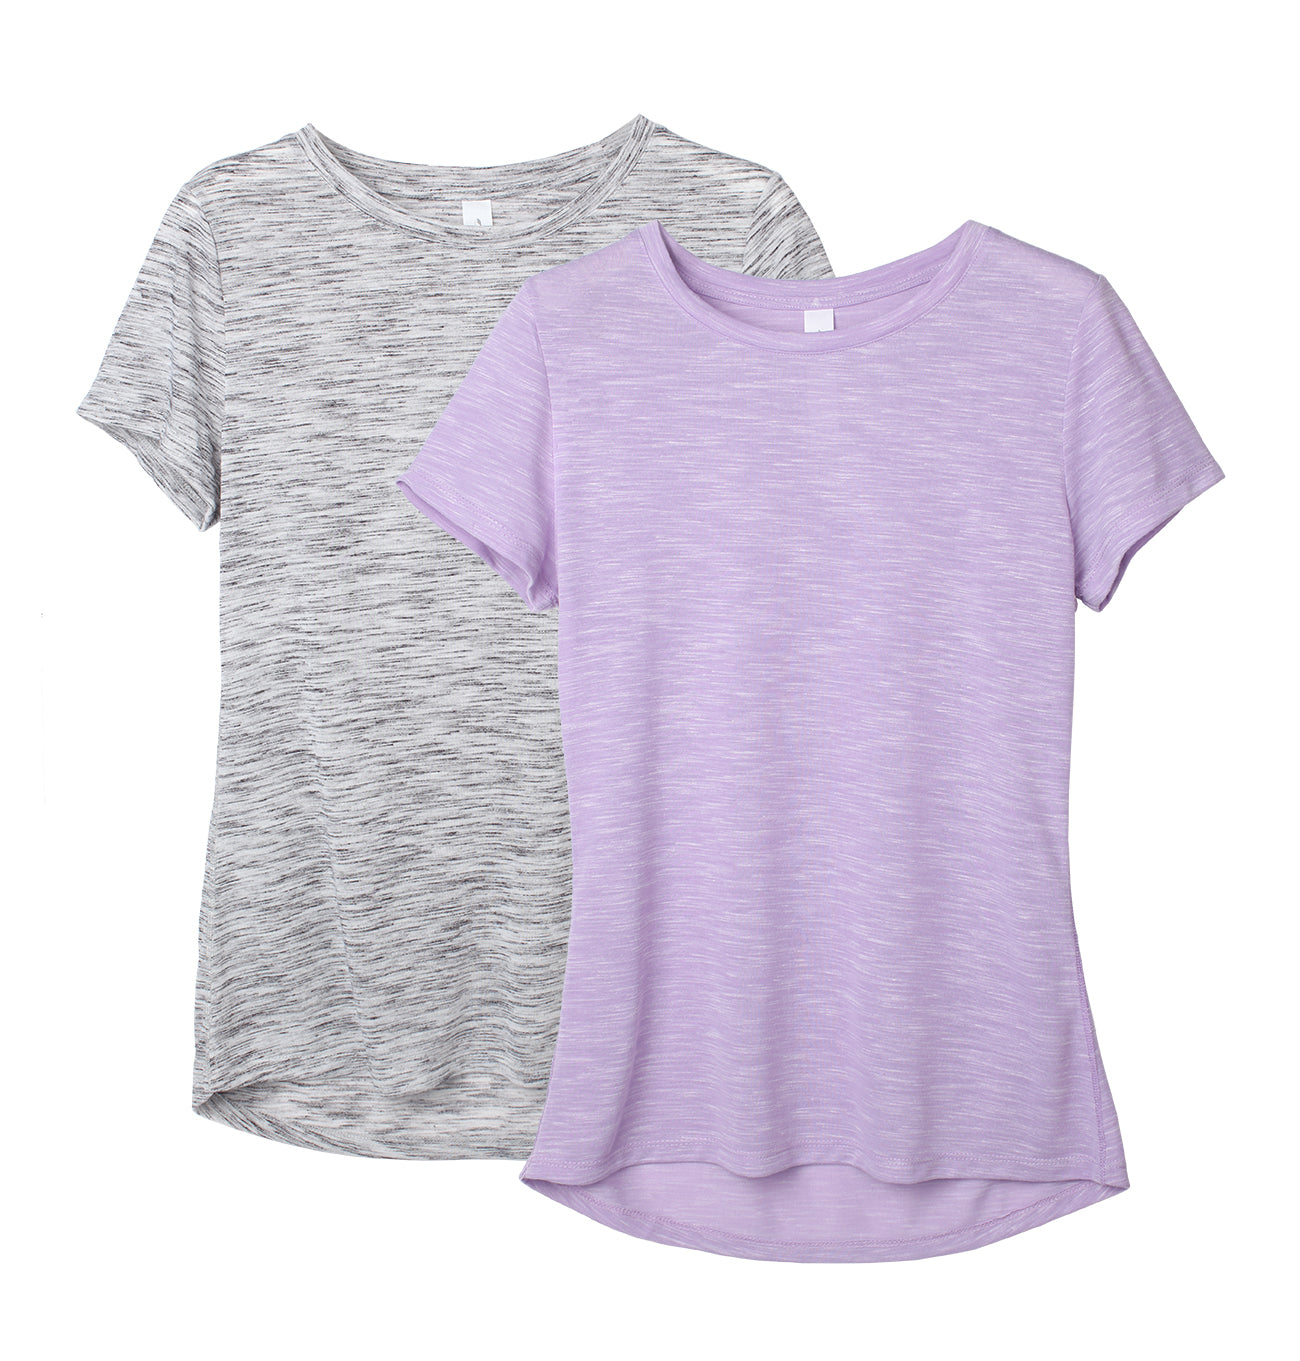 Sports T-Shirts - Buy Womens' T-Shirts for Gym, Running & Yoga Online